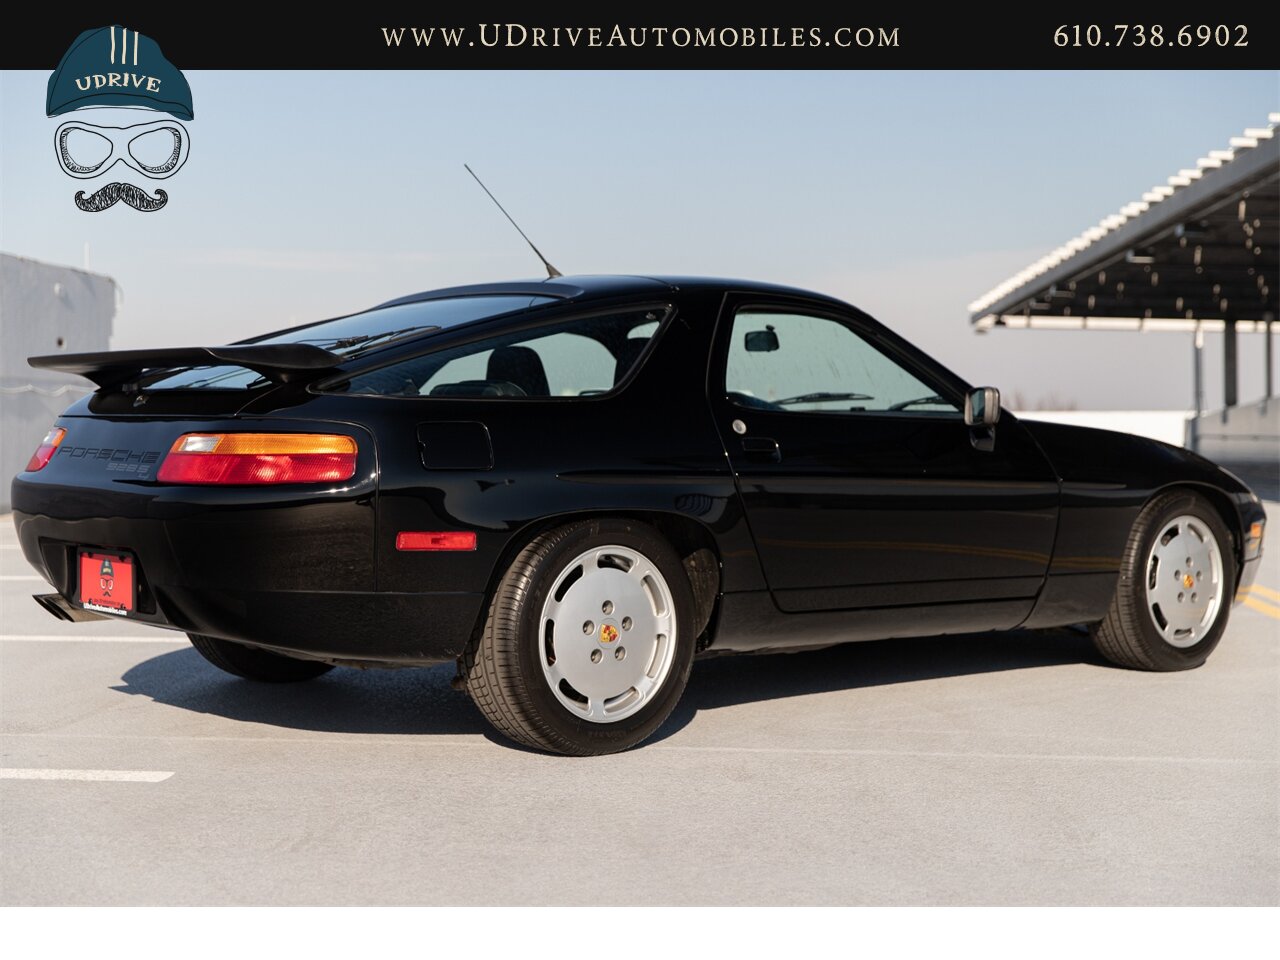 1990 Porsche 928 S4 $58k in Service History Since 2014   - Photo 18 - West Chester, PA 19382